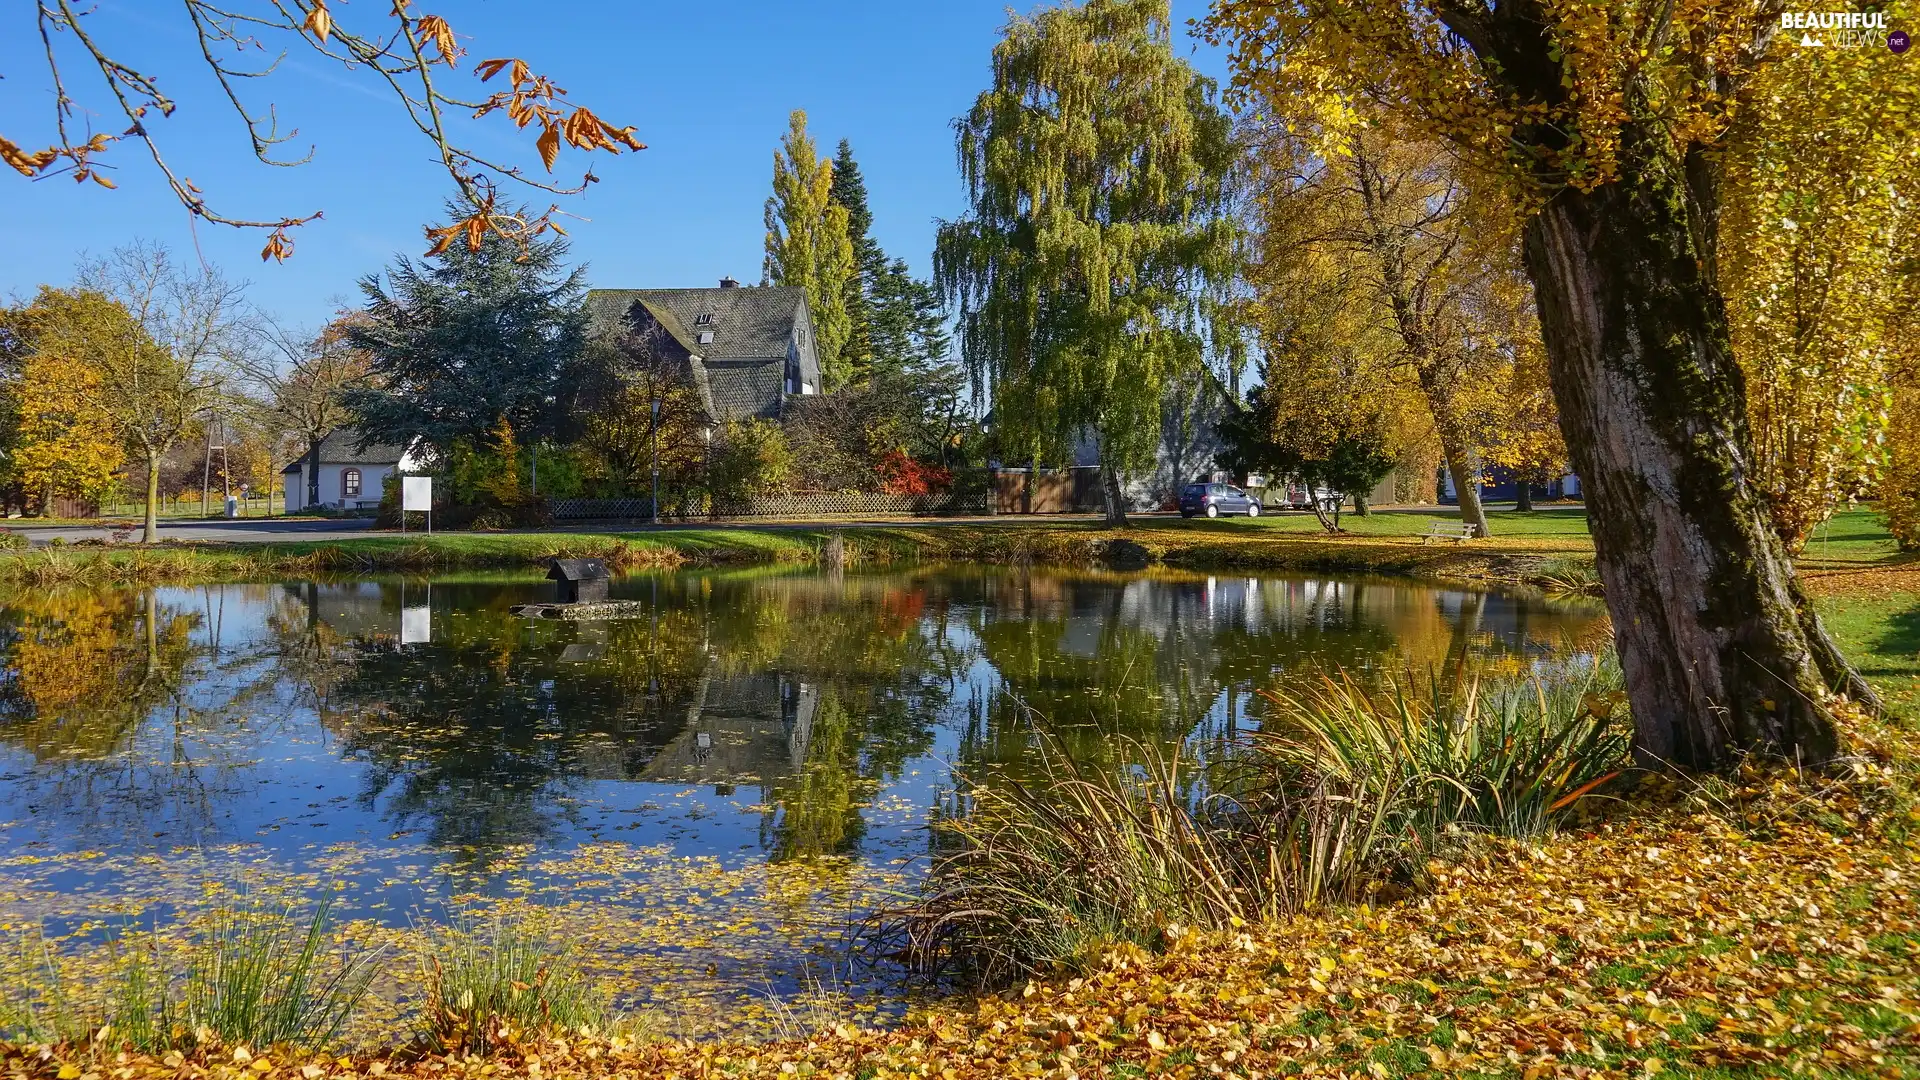 viewes, Pond - car, Houses, autumn, grass, trees